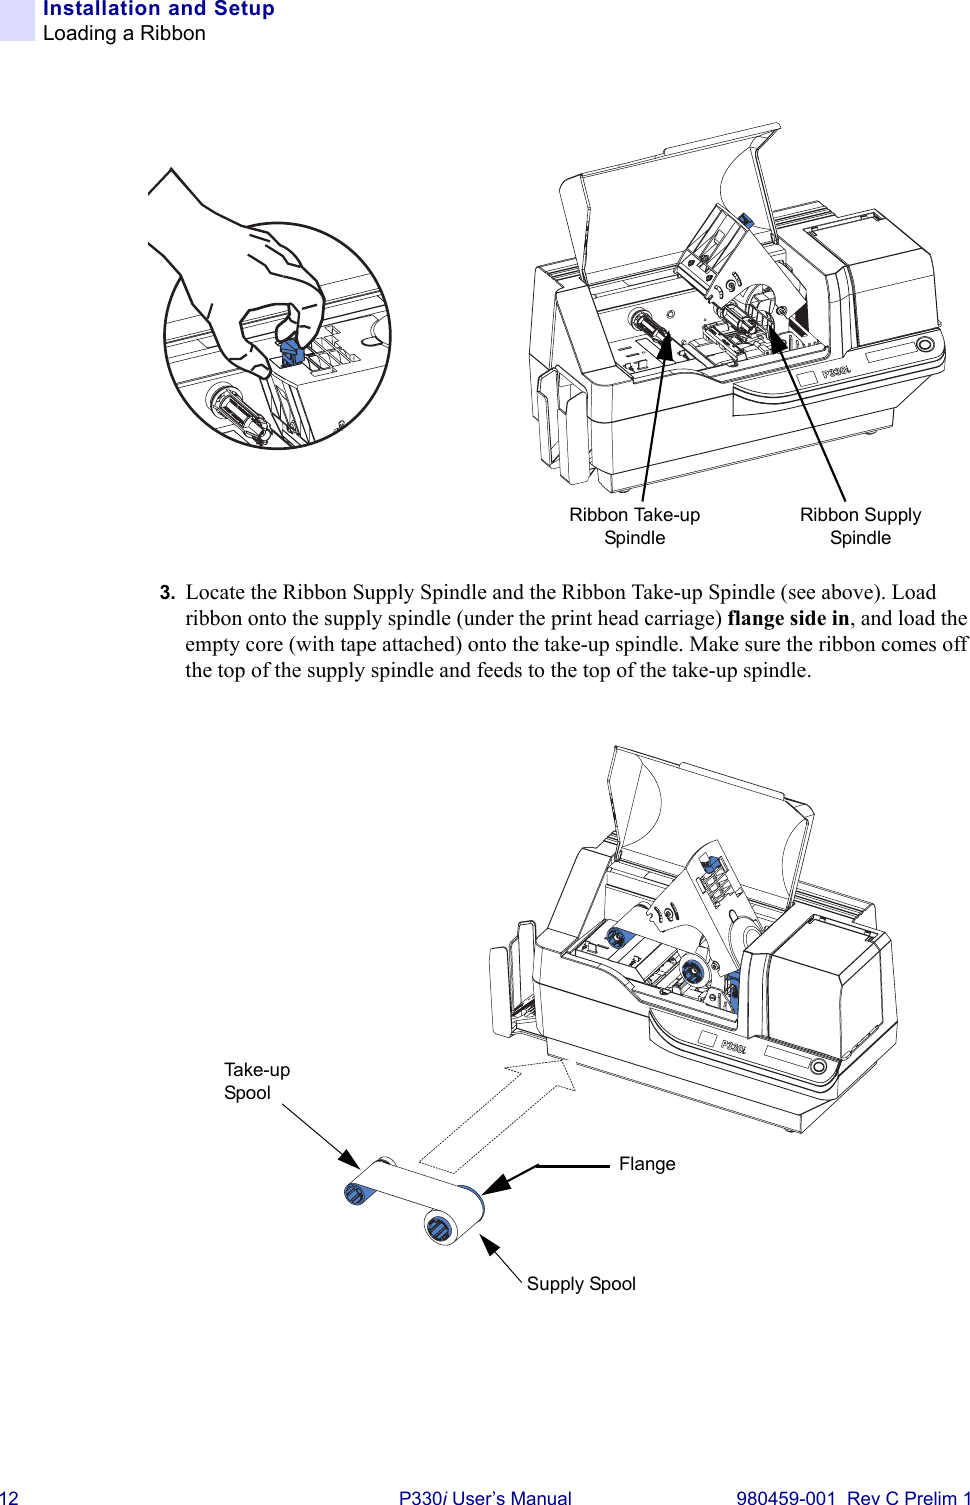 12 P330i User’s Manual 980459-001  Rev C Prelim 1Installation and SetupLoading a Ribbon3. Locate the Ribbon Supply Spindle and the Ribbon Take-up Spindle (see above). Load ribbon onto the supply spindle (under the print head carriage) flange side in, and load the empty core (with tape attached) onto the take-up spindle. Make sure the ribbon comes off the top of the supply spindle and feeds to the top of the take-up spindle.Ribbon Supply SpindleRibbon Take-up SpindleFlangeSupply SpoolTake-u p  Spool